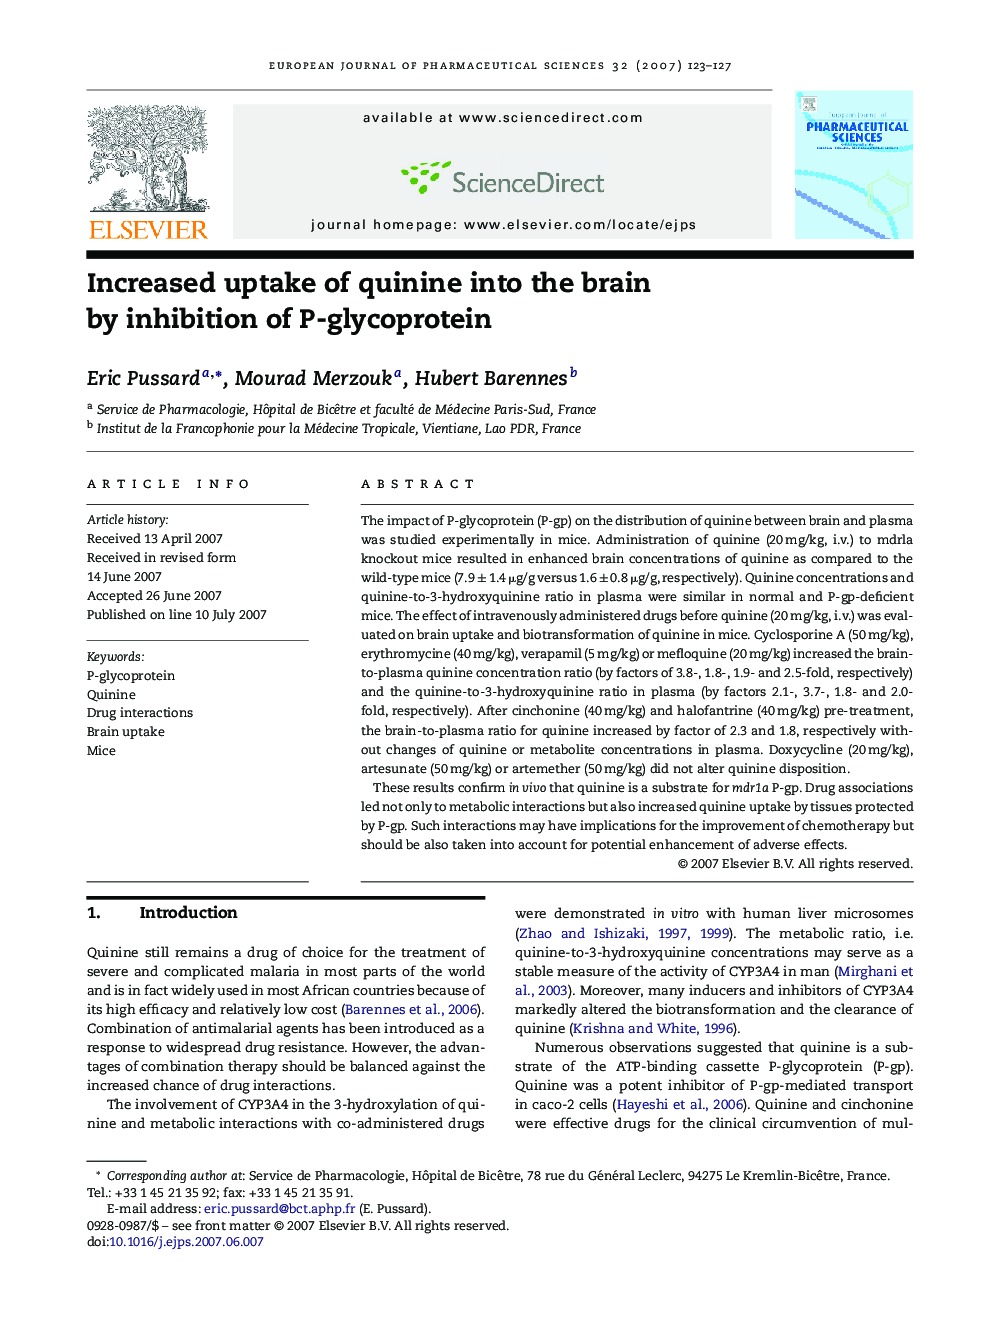 Increased uptake of quinine into the brain by inhibition of P-glycoprotein